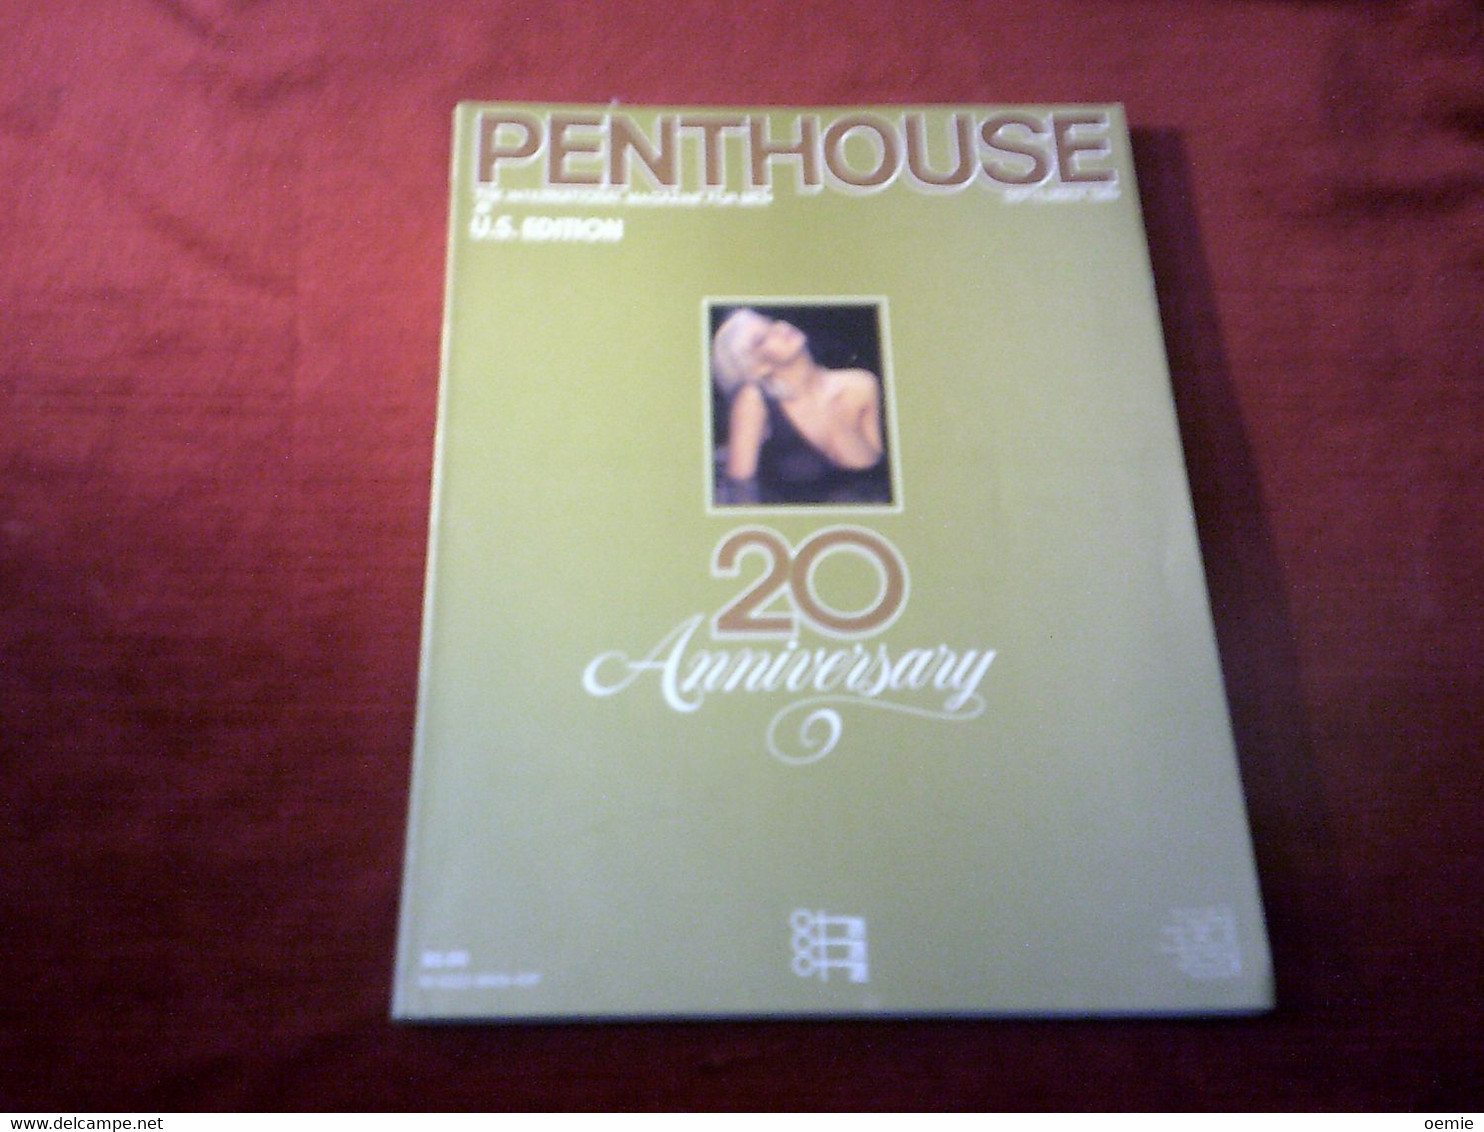 PENTHOUSE  US EDITION SEPTEMBER  20 ANNIVERSARY   AVEV LE POSTER - Pour Hommes